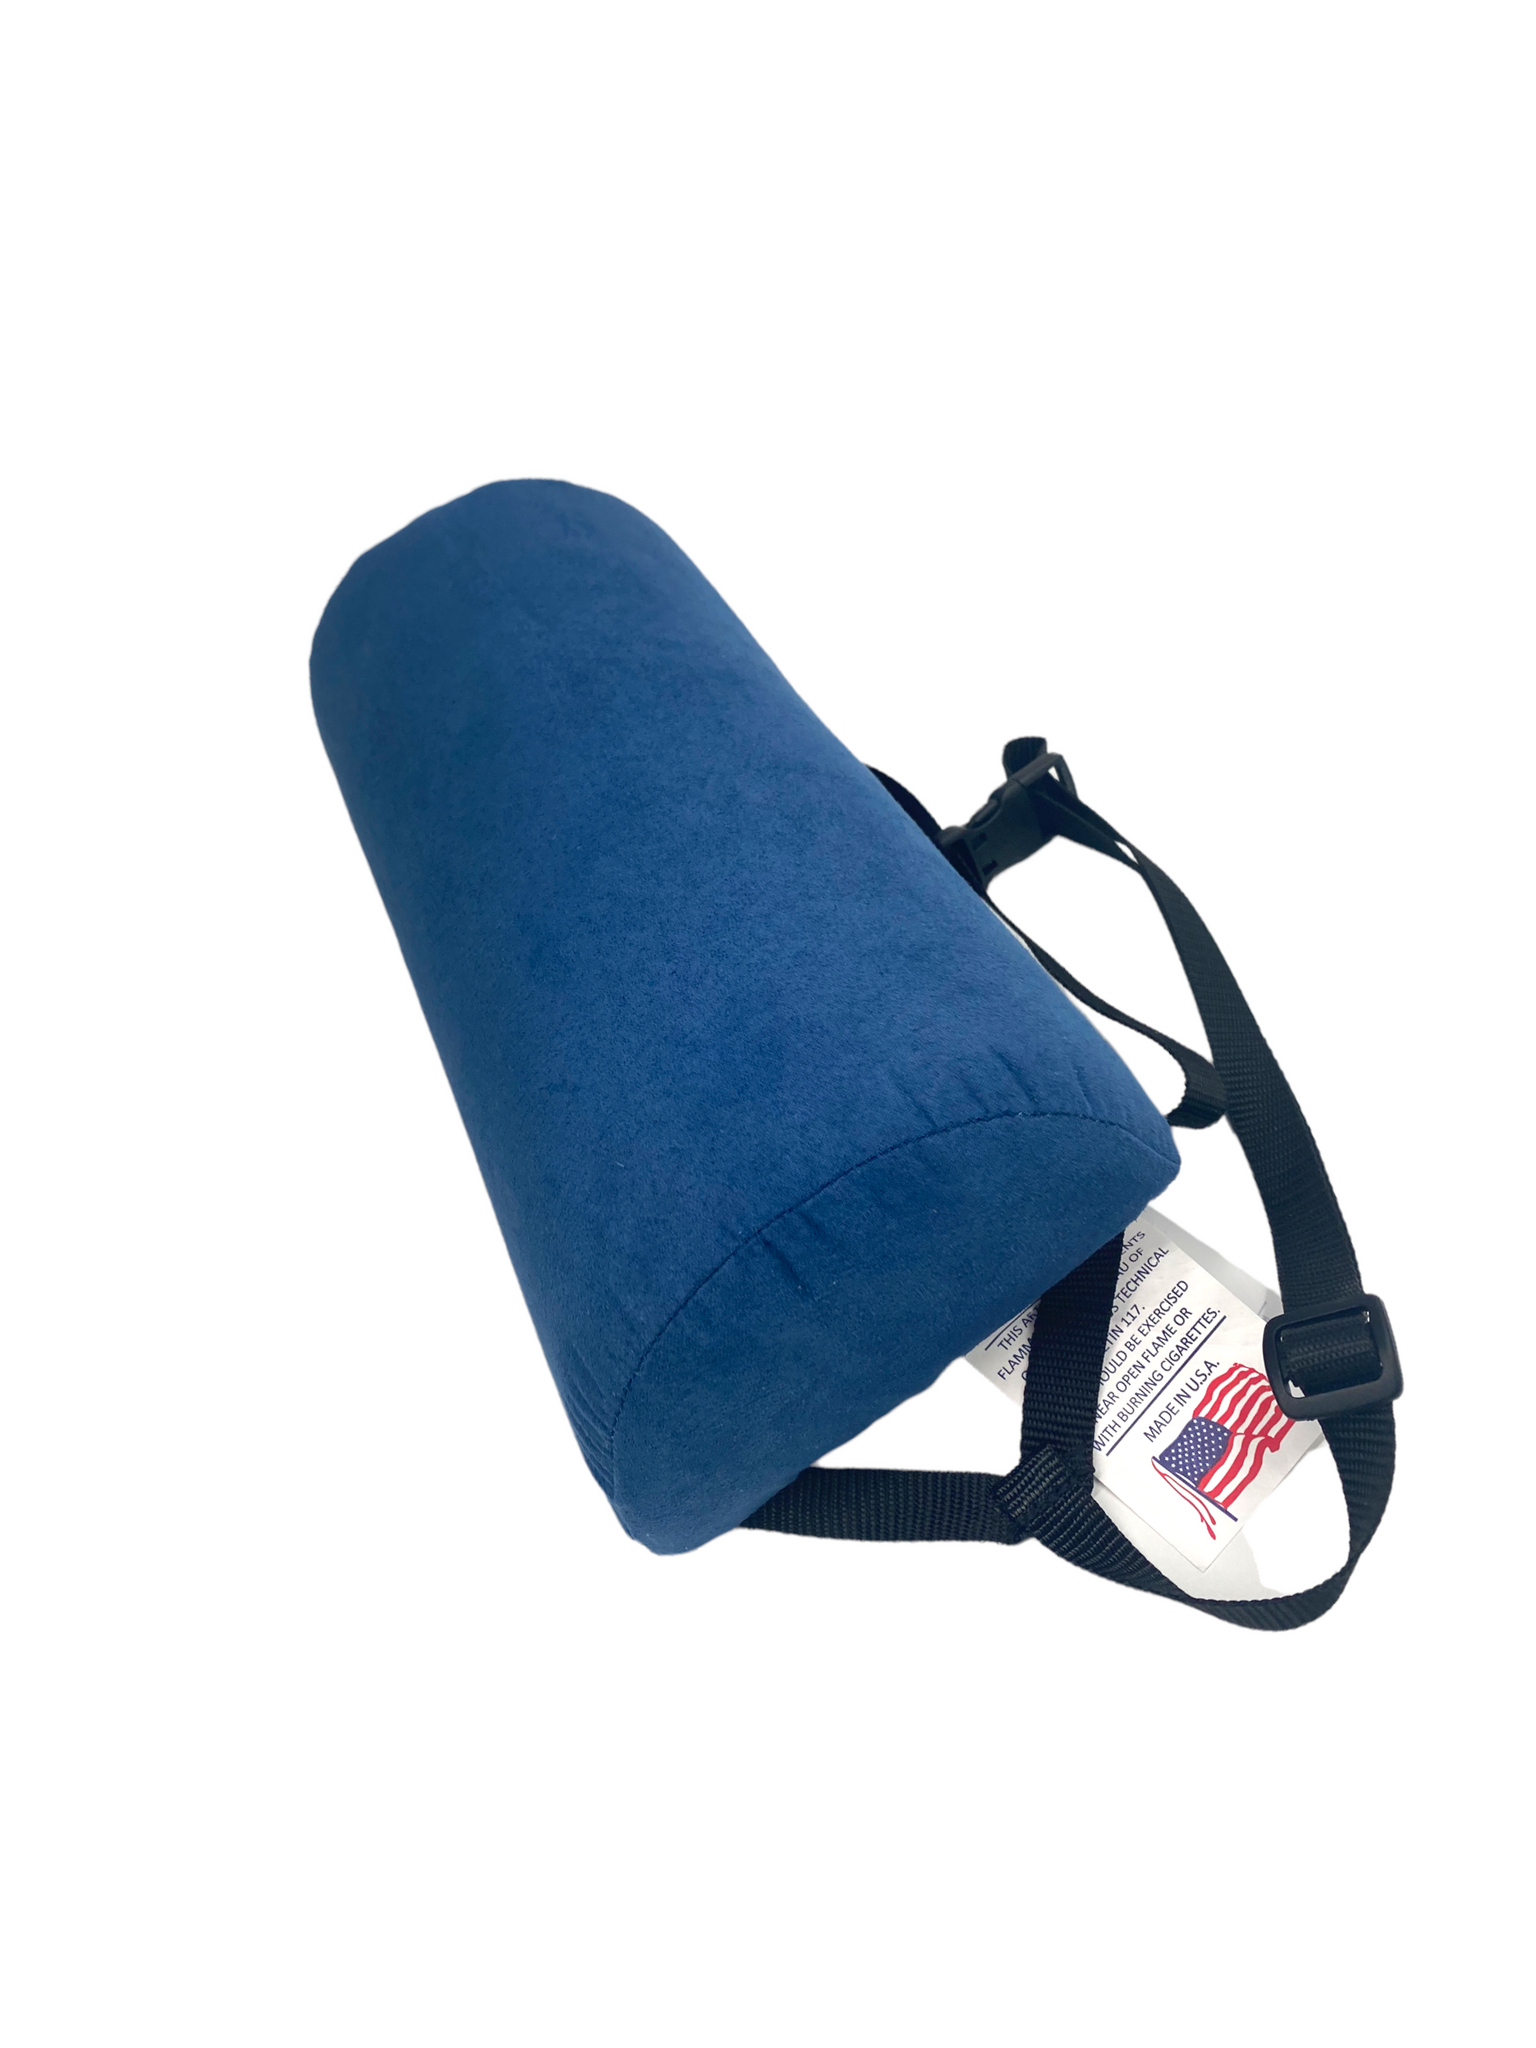 Discover The Benefits Of An Lumbar Support Cushion - YBPR